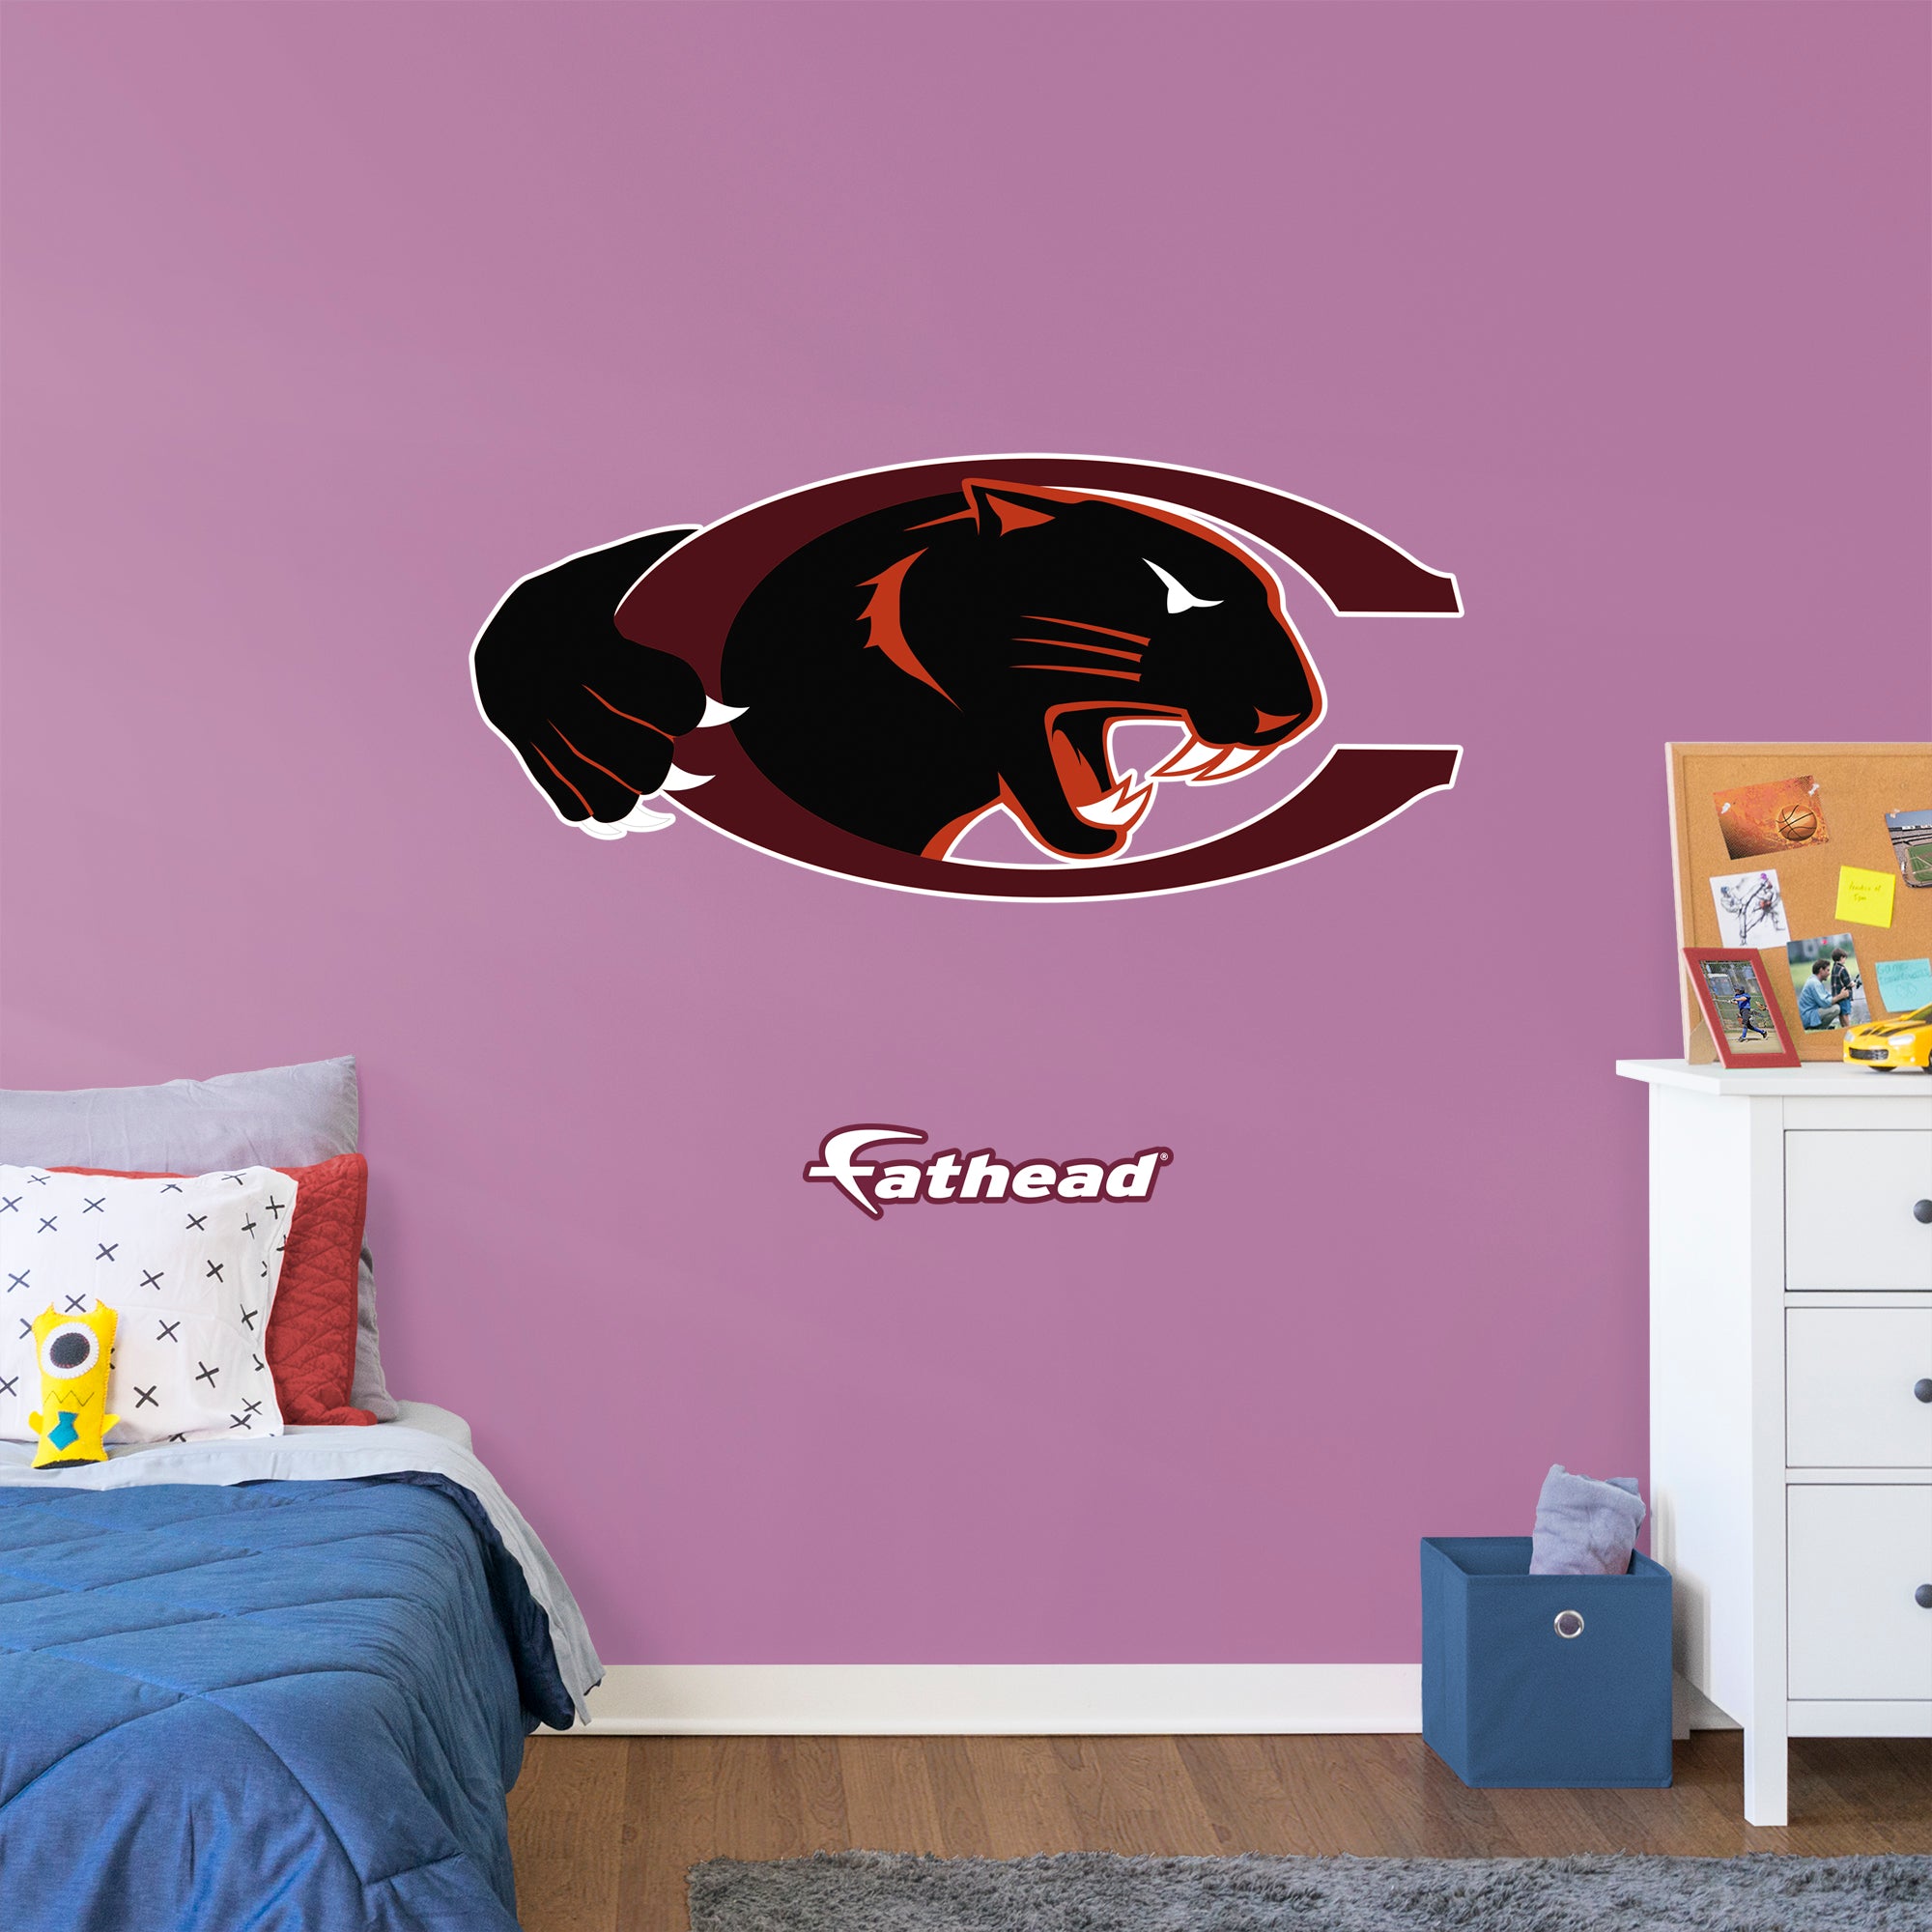 Claflin University 2020 RealBig - Officially Licensed NCAA Removable Wall Decal Giant Decal (25"W x 55"H) by Fathead | Vinyl